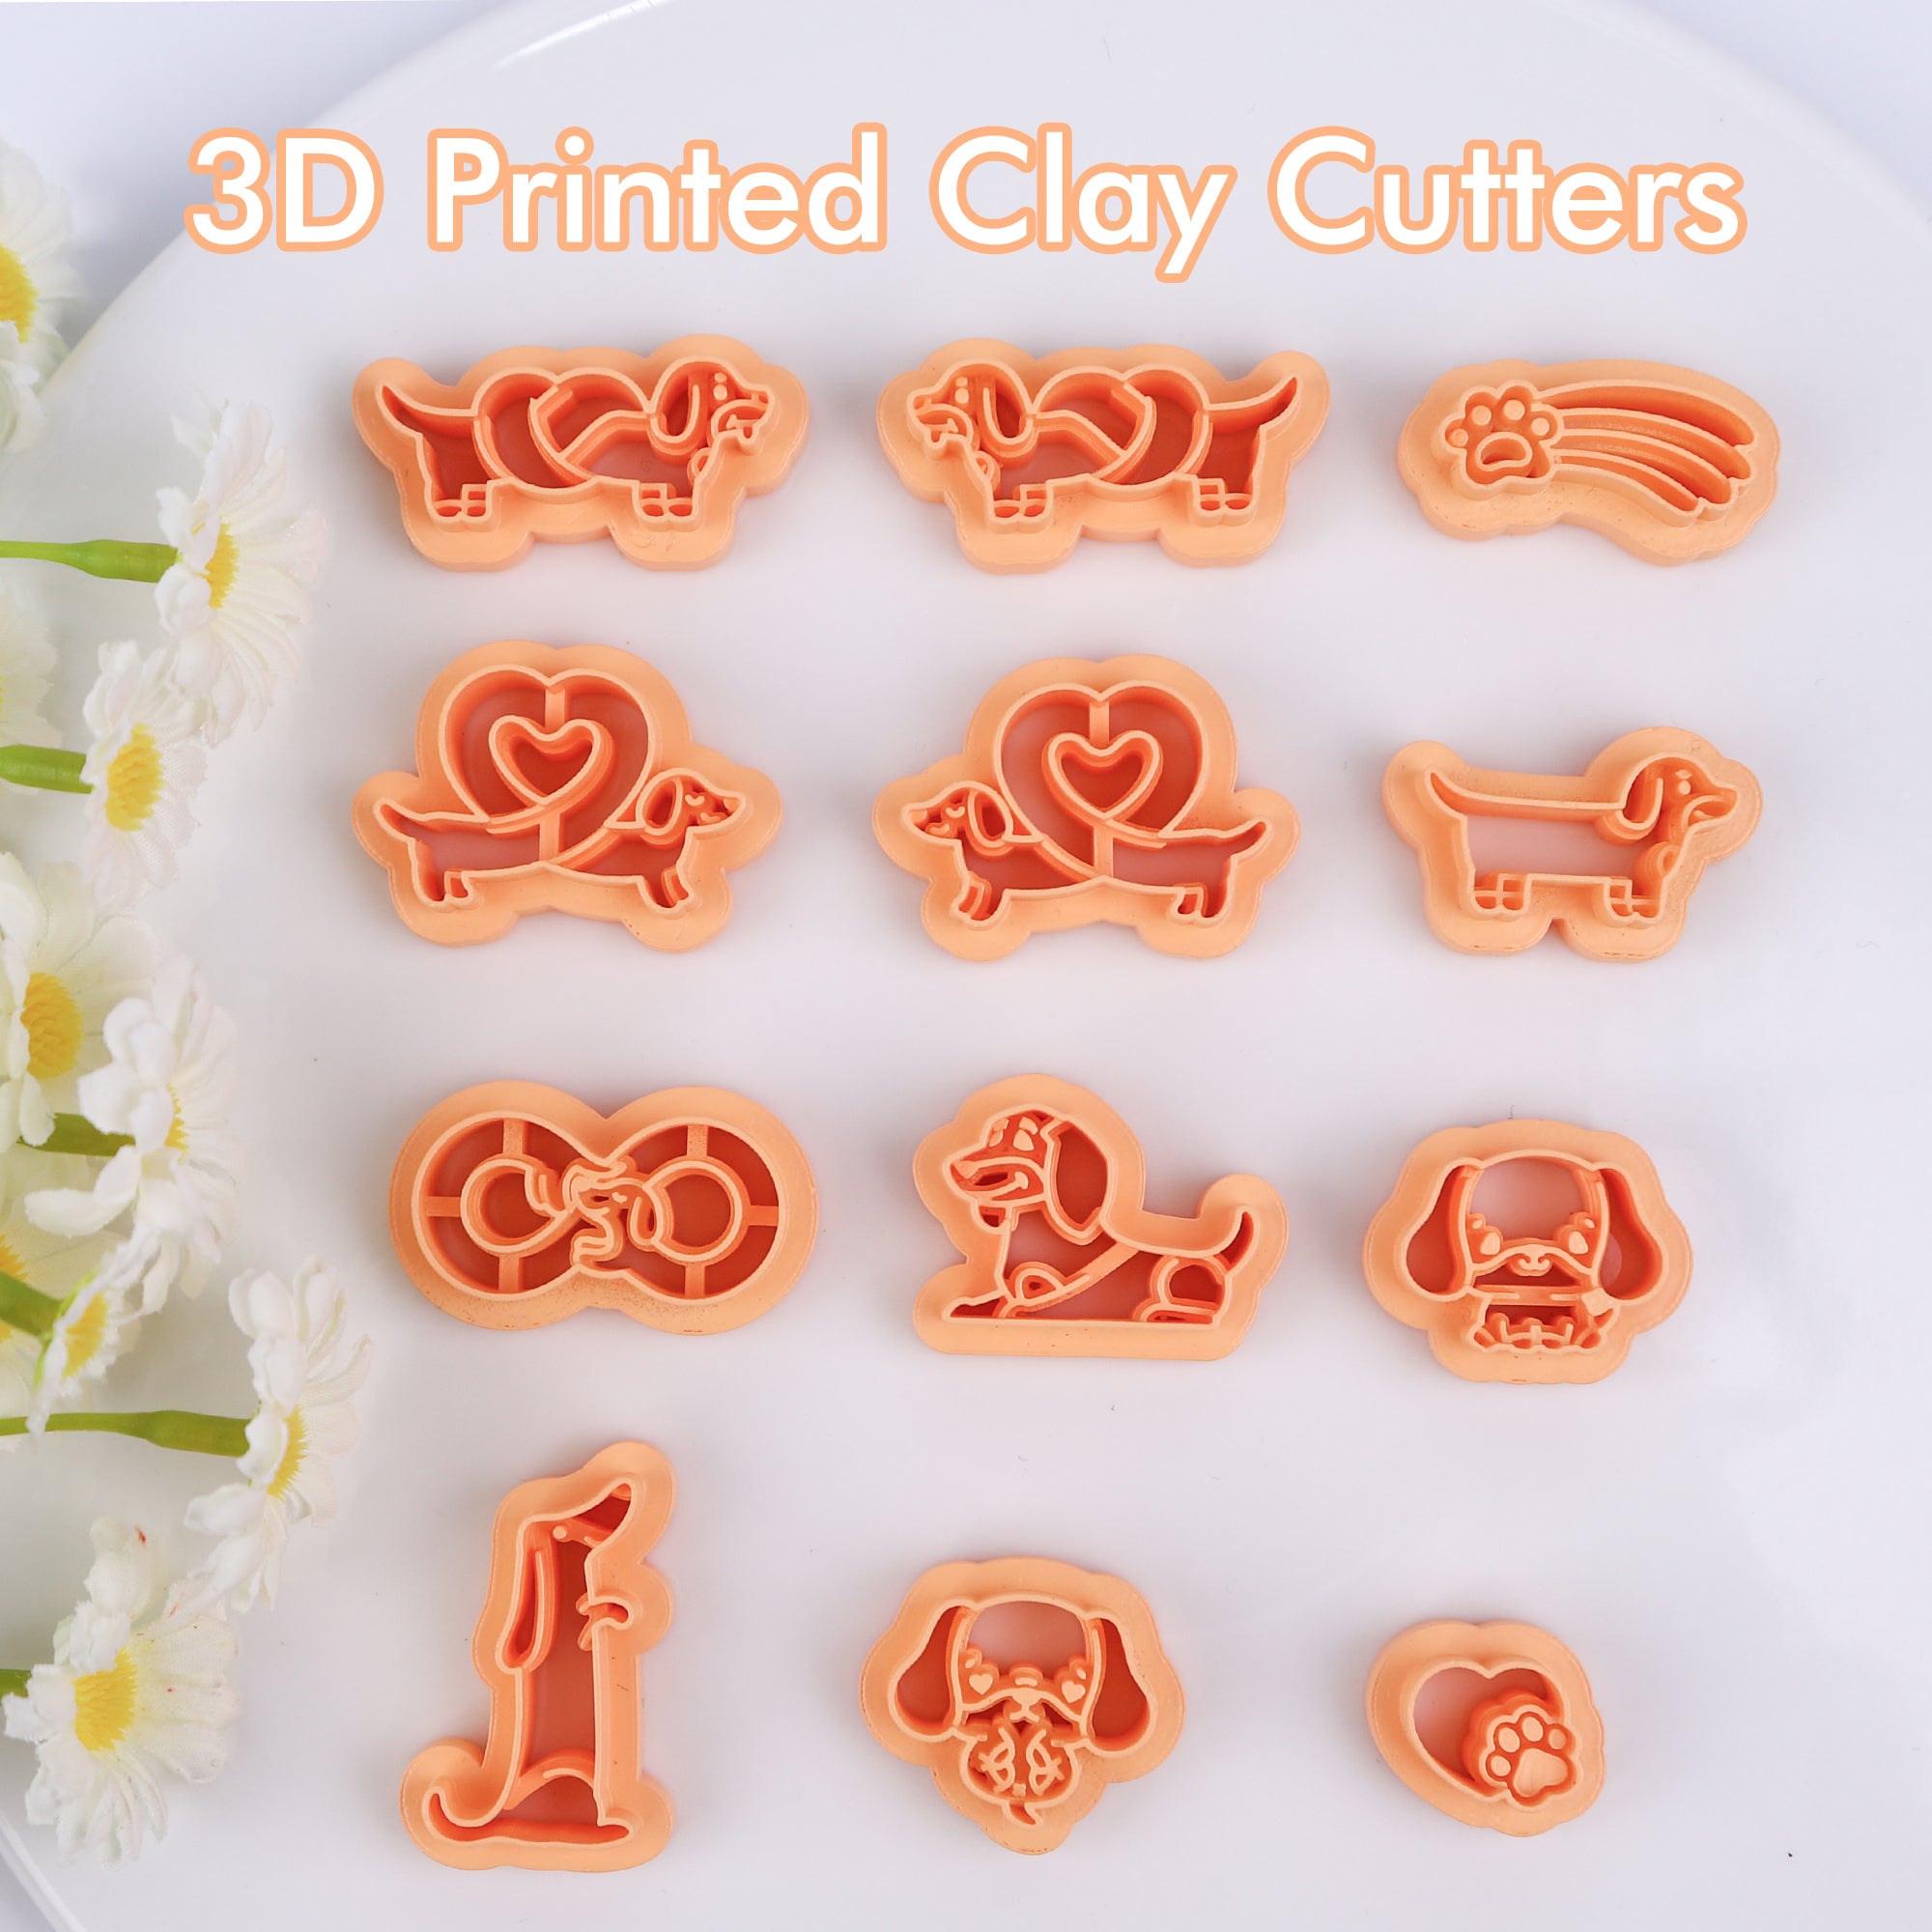 Puocaon Sausage Dog Clay Cutters - 12 Pcs Clay Cutters for Polymer Clay Earrings, Puppy Dog Pets Clay Cutters for Earrings Making, Animal Dog Clay Earring Cutters, Dachshund Clay Jewelry Cutters